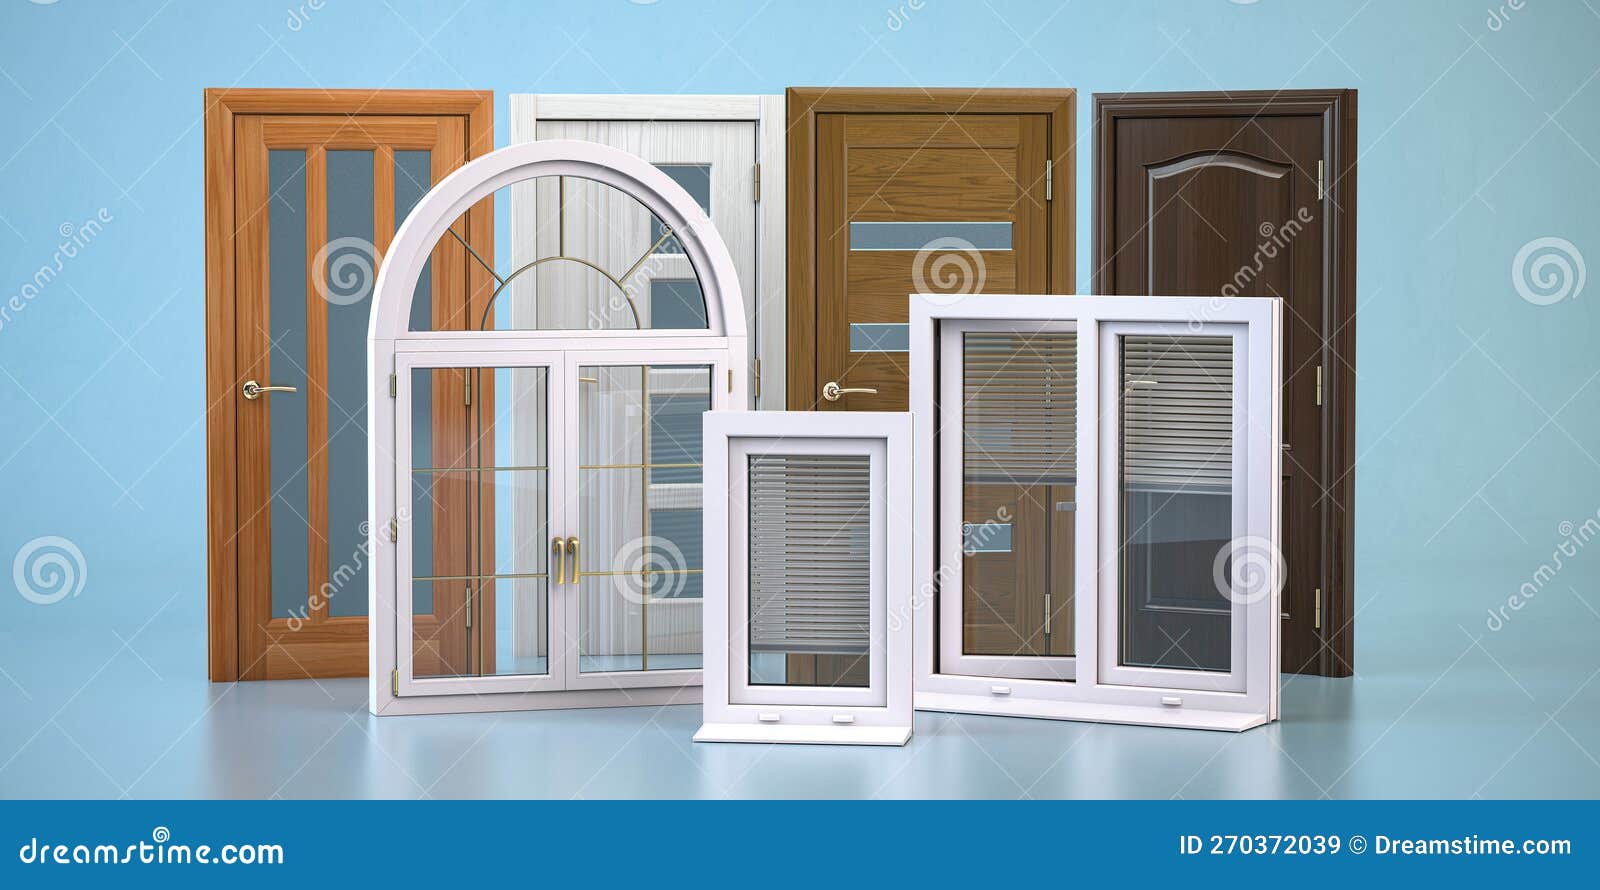 windows and doora of different types  on white